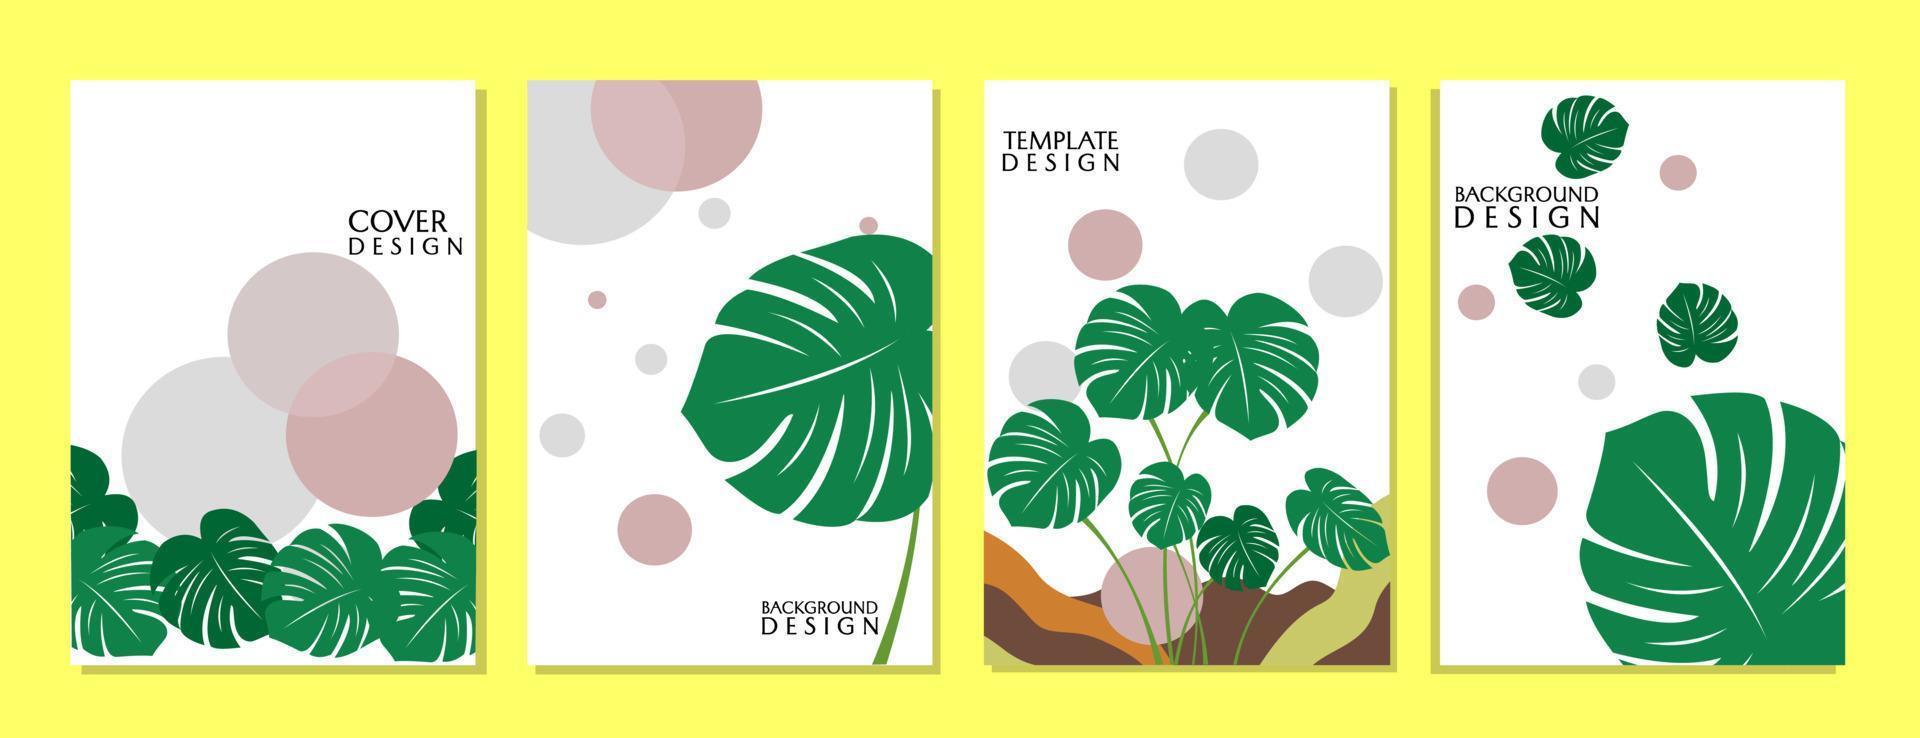 Set of abstract covers with leaf elements, white color natrual background design, vector